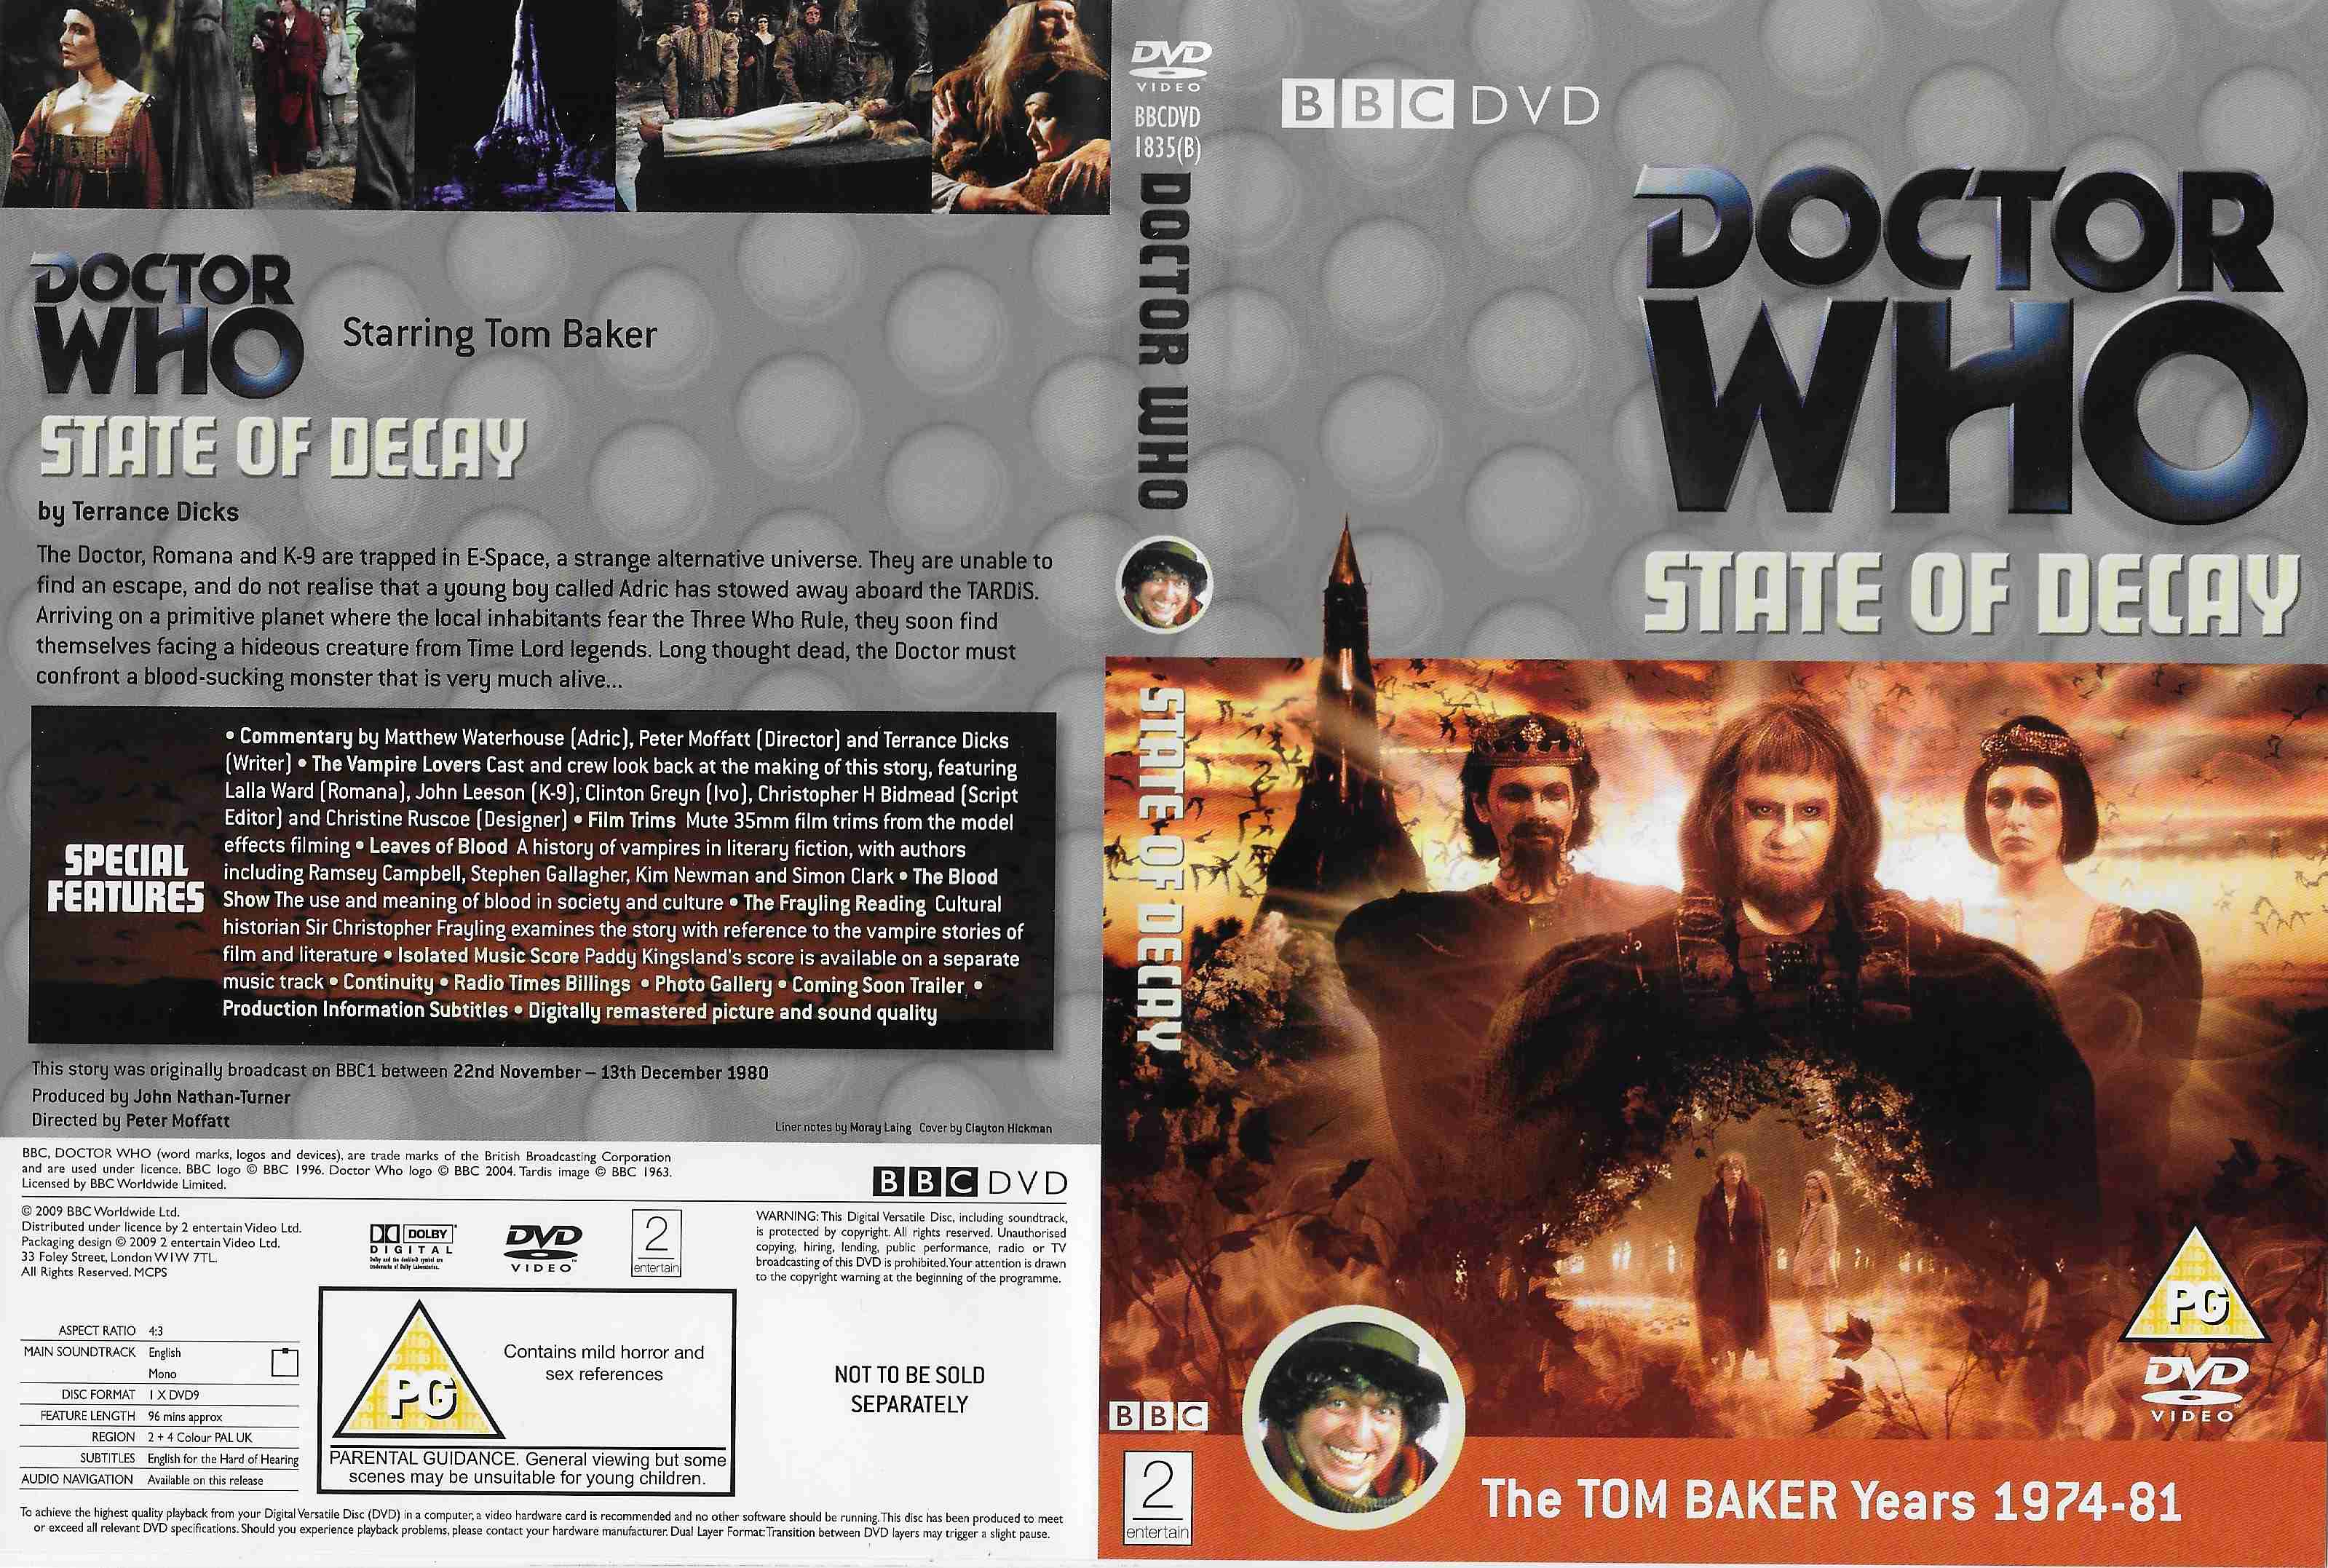 Picture of BBCDVD 1835B Doctor Who - State of decay by artist Terrance Dicks from the BBC records and Tapes library